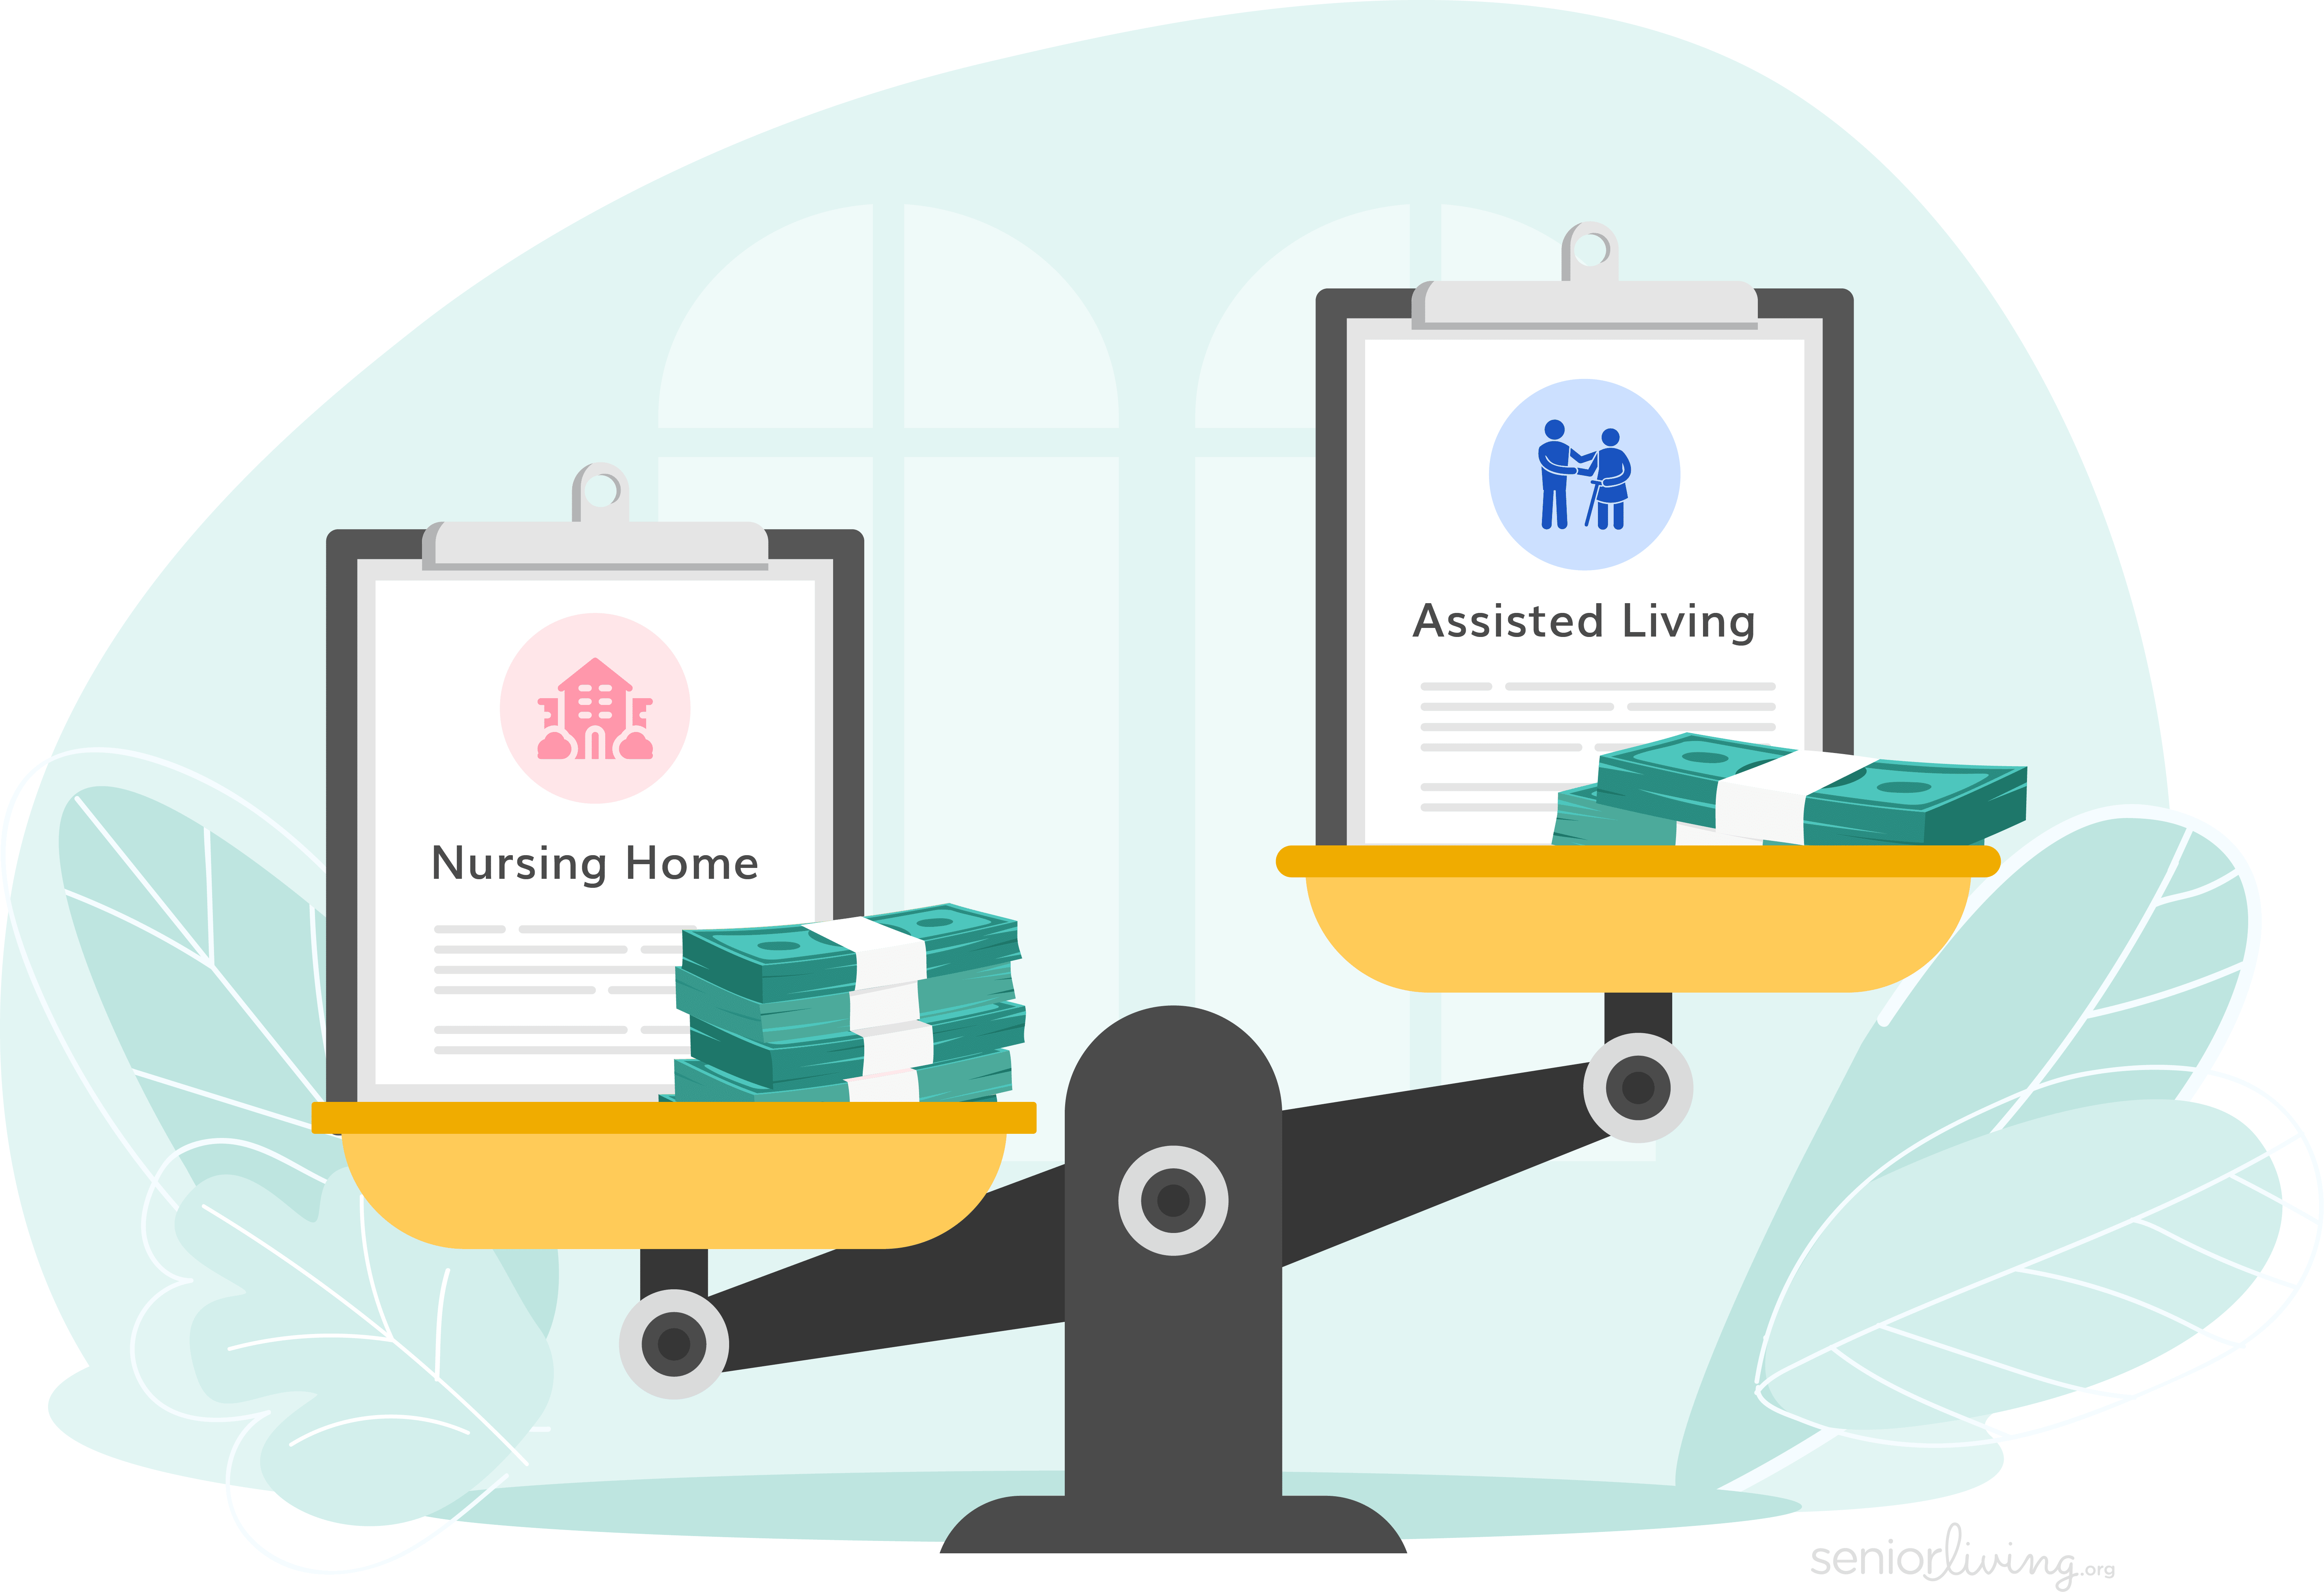 Cost of Nursing Homes vs. Assisted Living